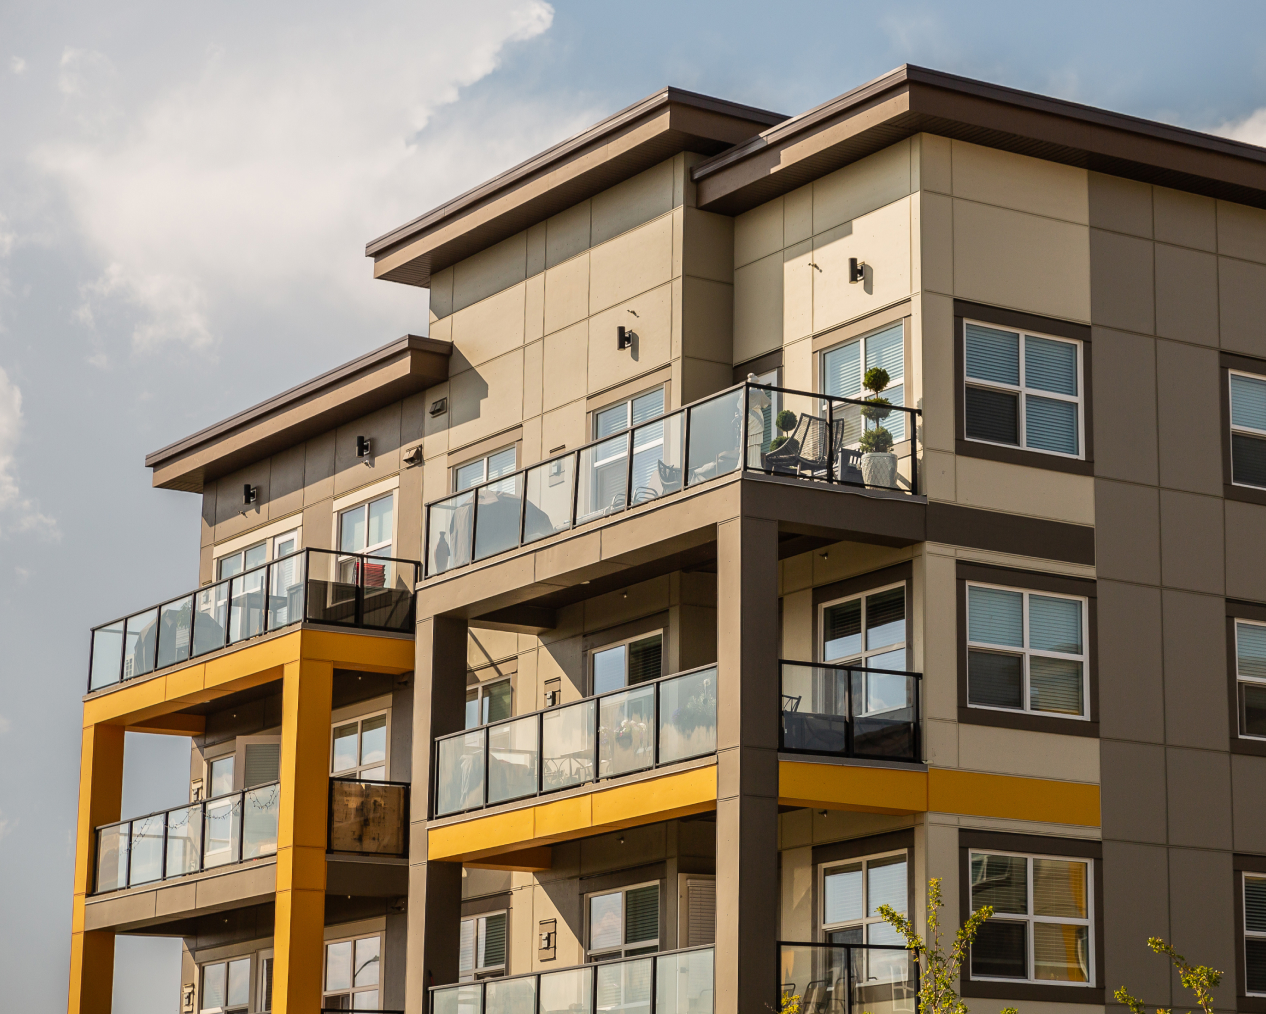 A yellow and beige apartment building with EasyTrim siding.